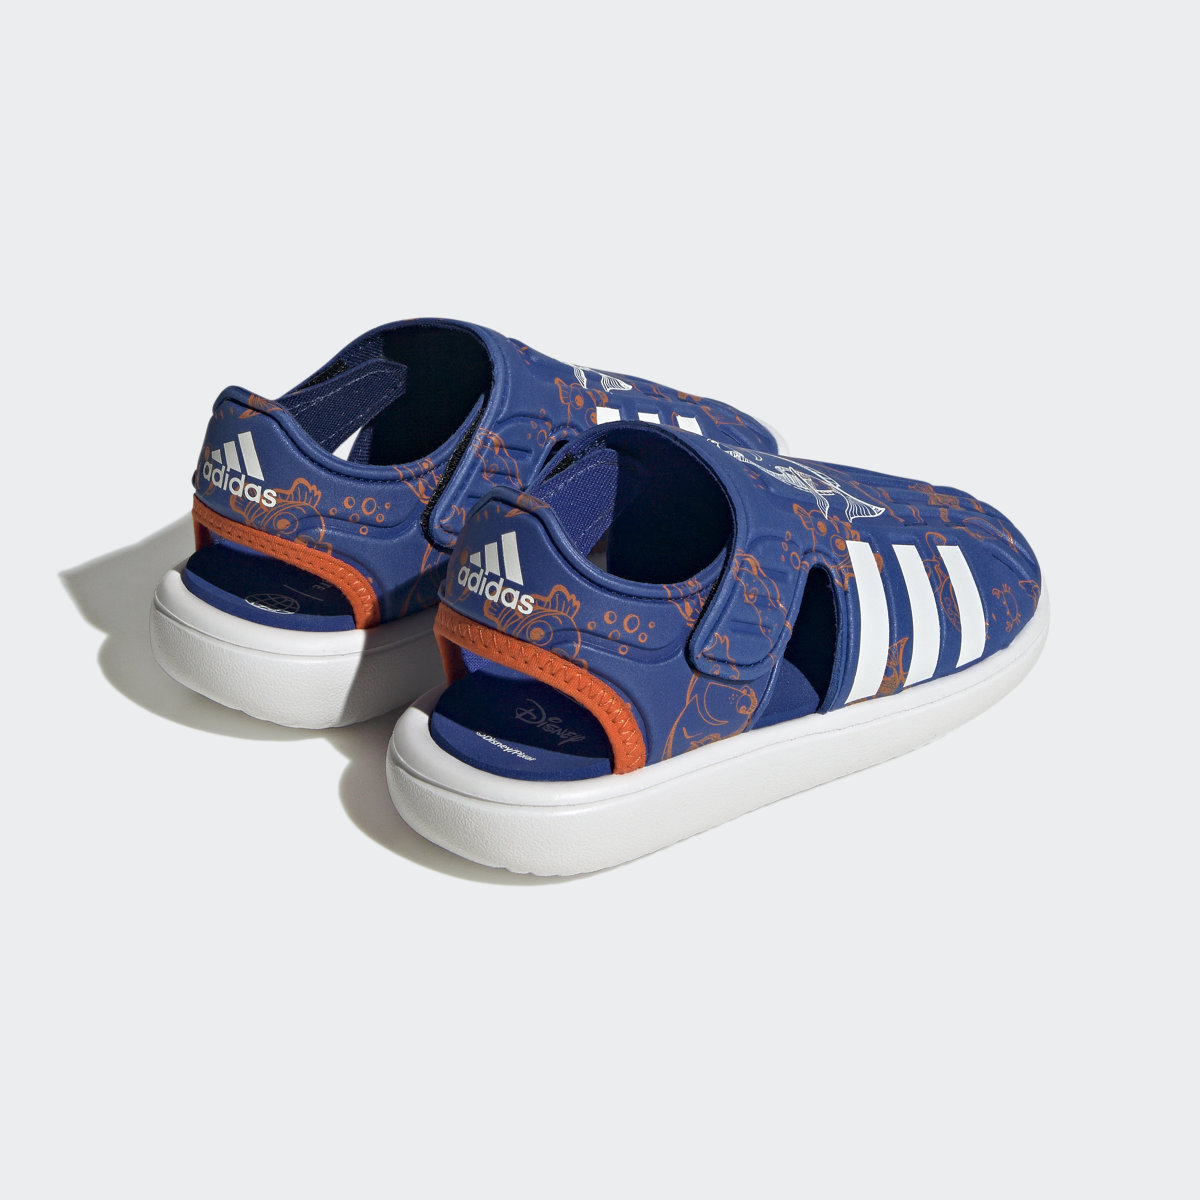 Adidas x Disney Finding Nemo and Dory Closed Toe Summer Sandals. 6